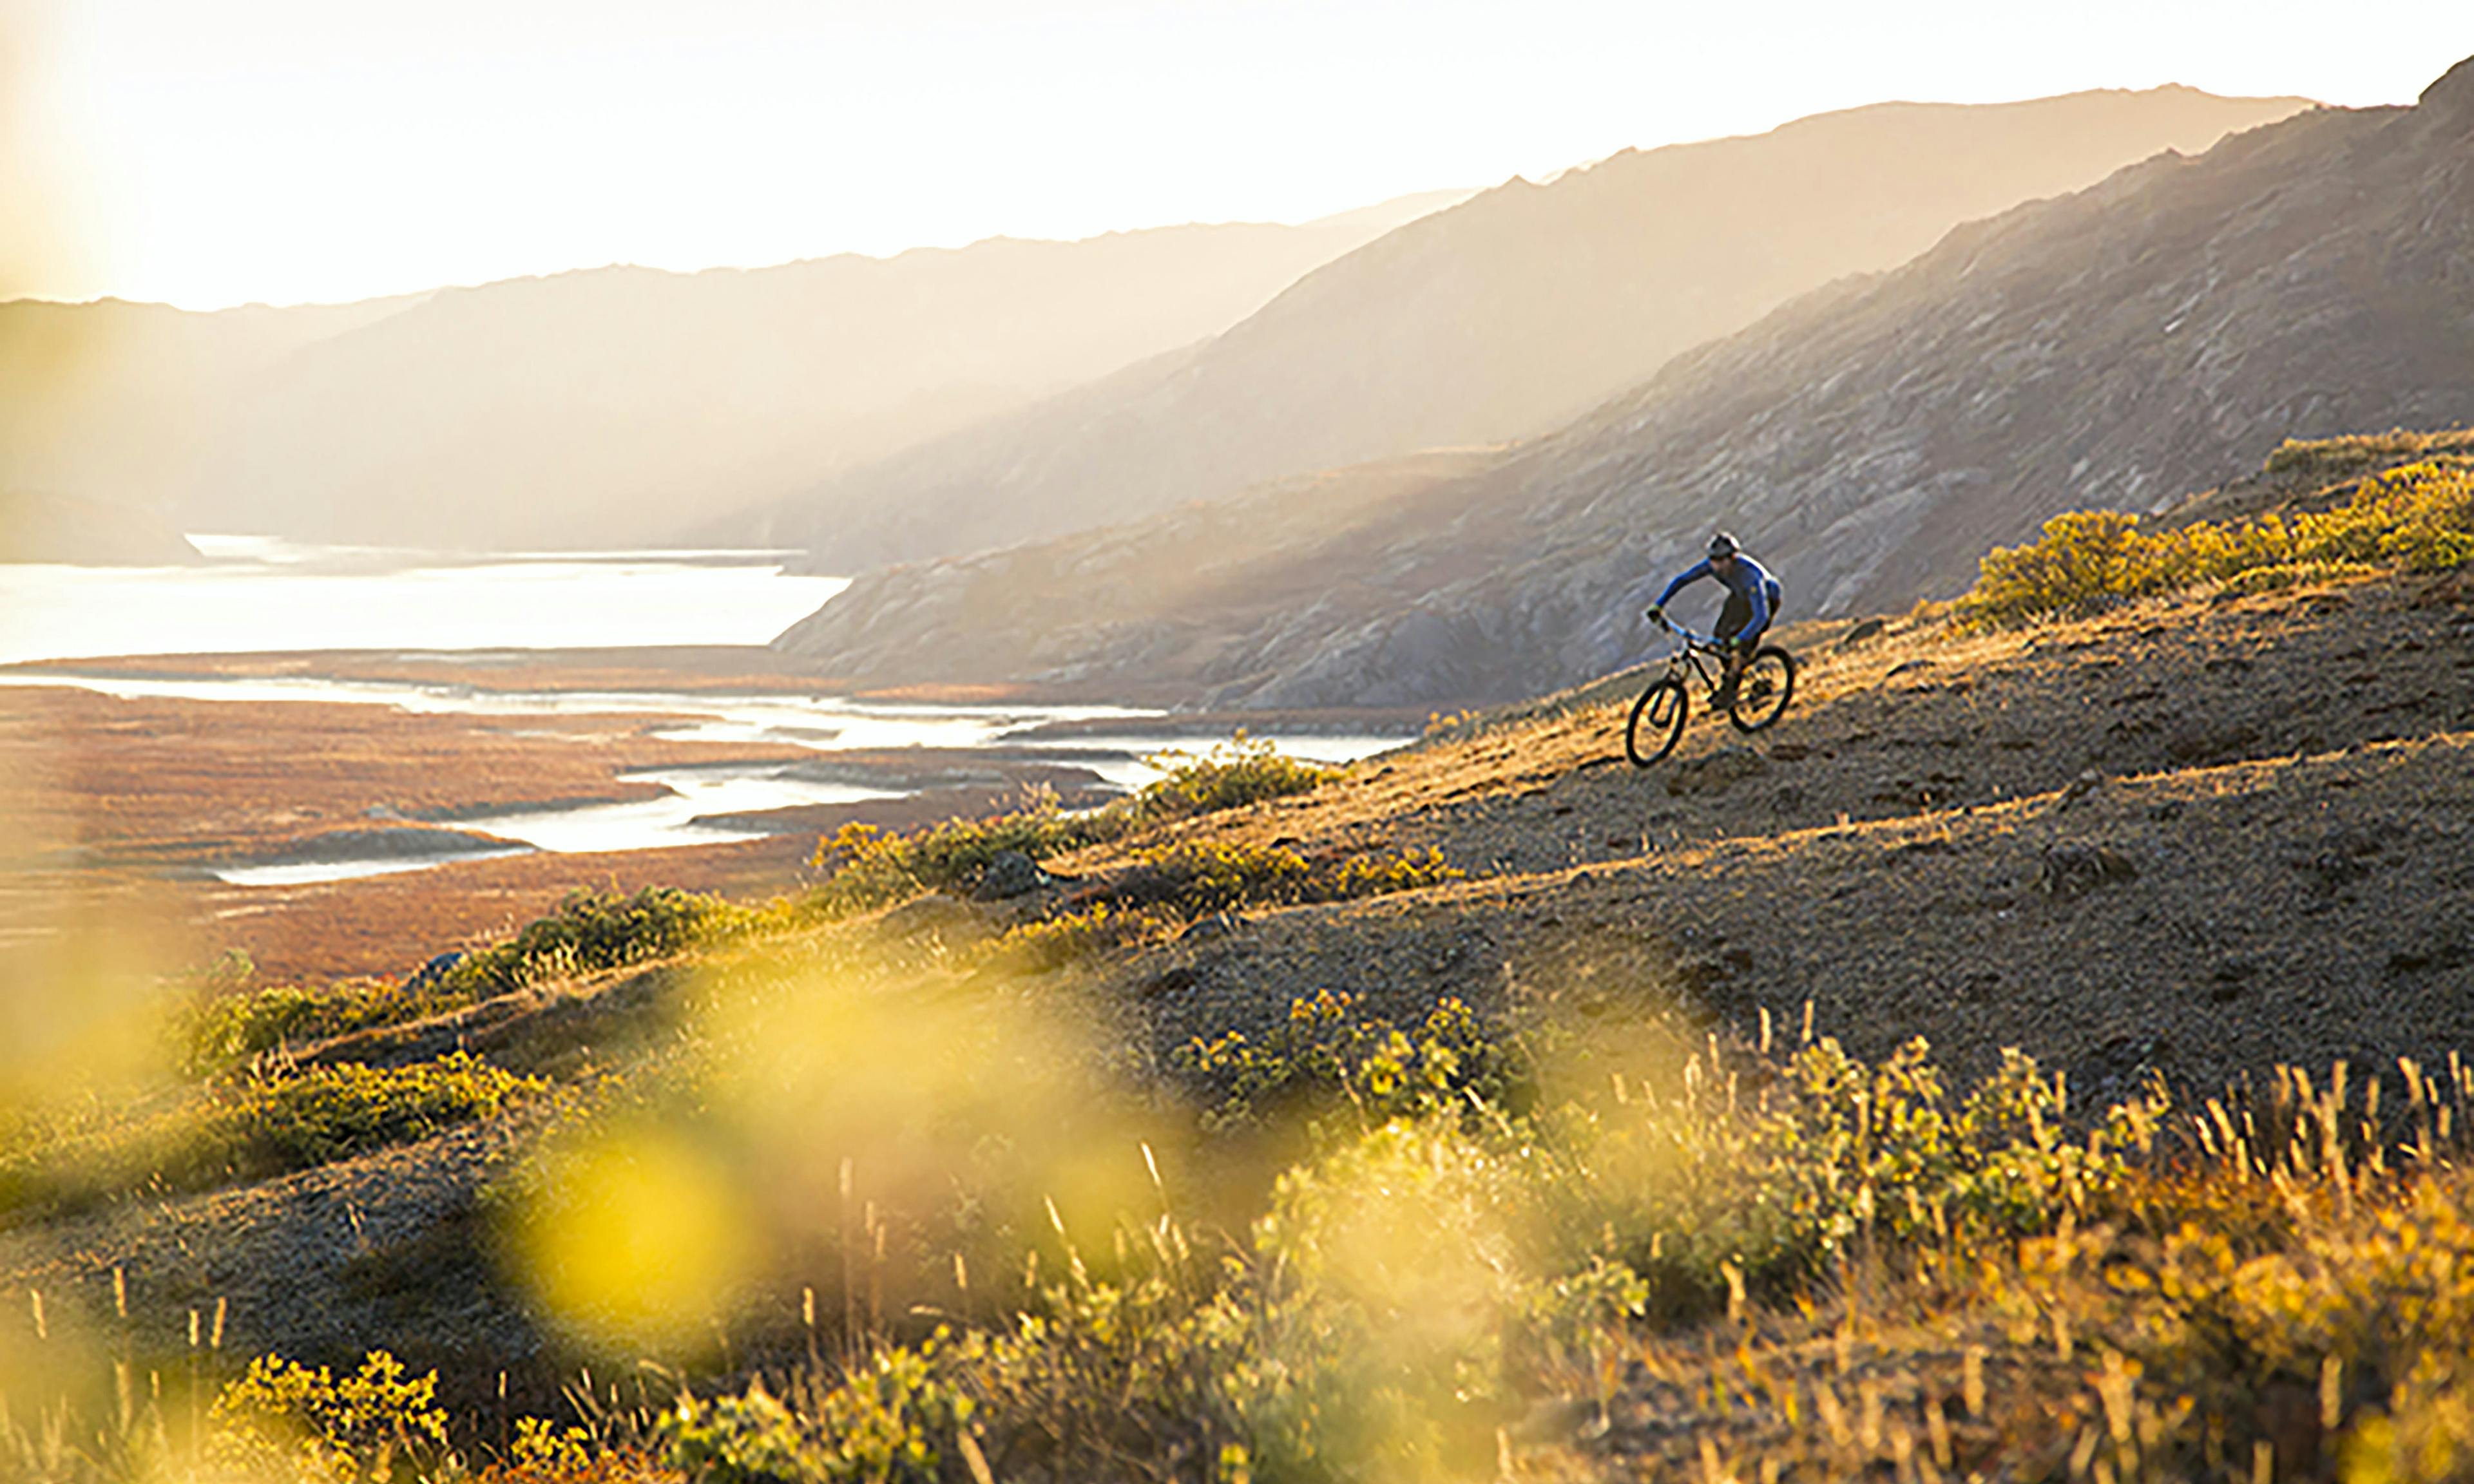 A man rides a bike along a grassy ridge at sunset, with mountains in the background.